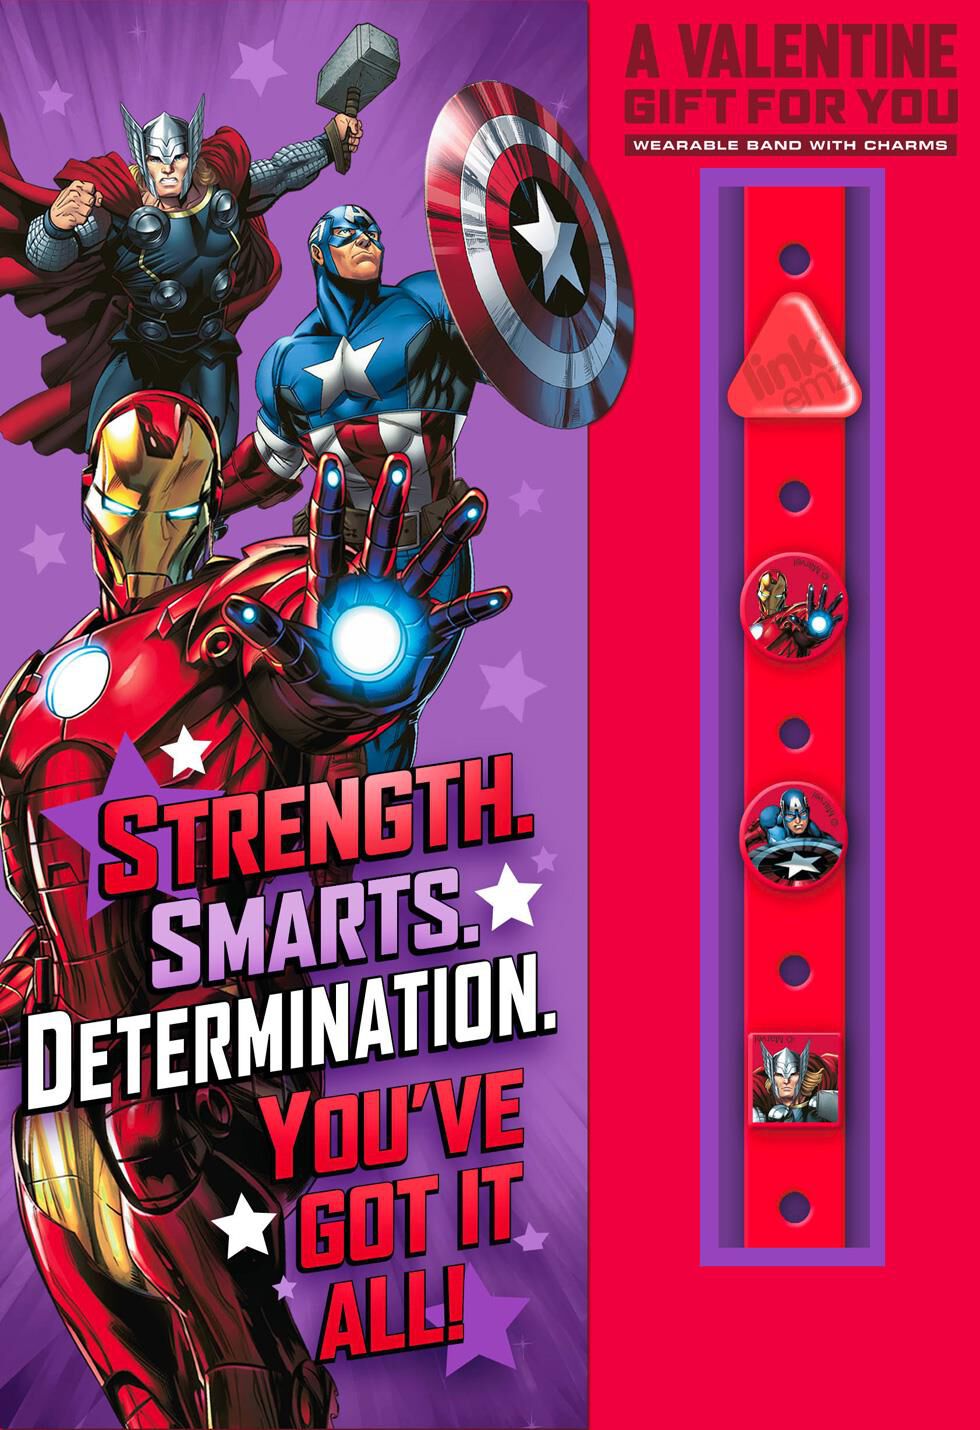 Marvel Avengers Valentine's Day Card With Link'emz